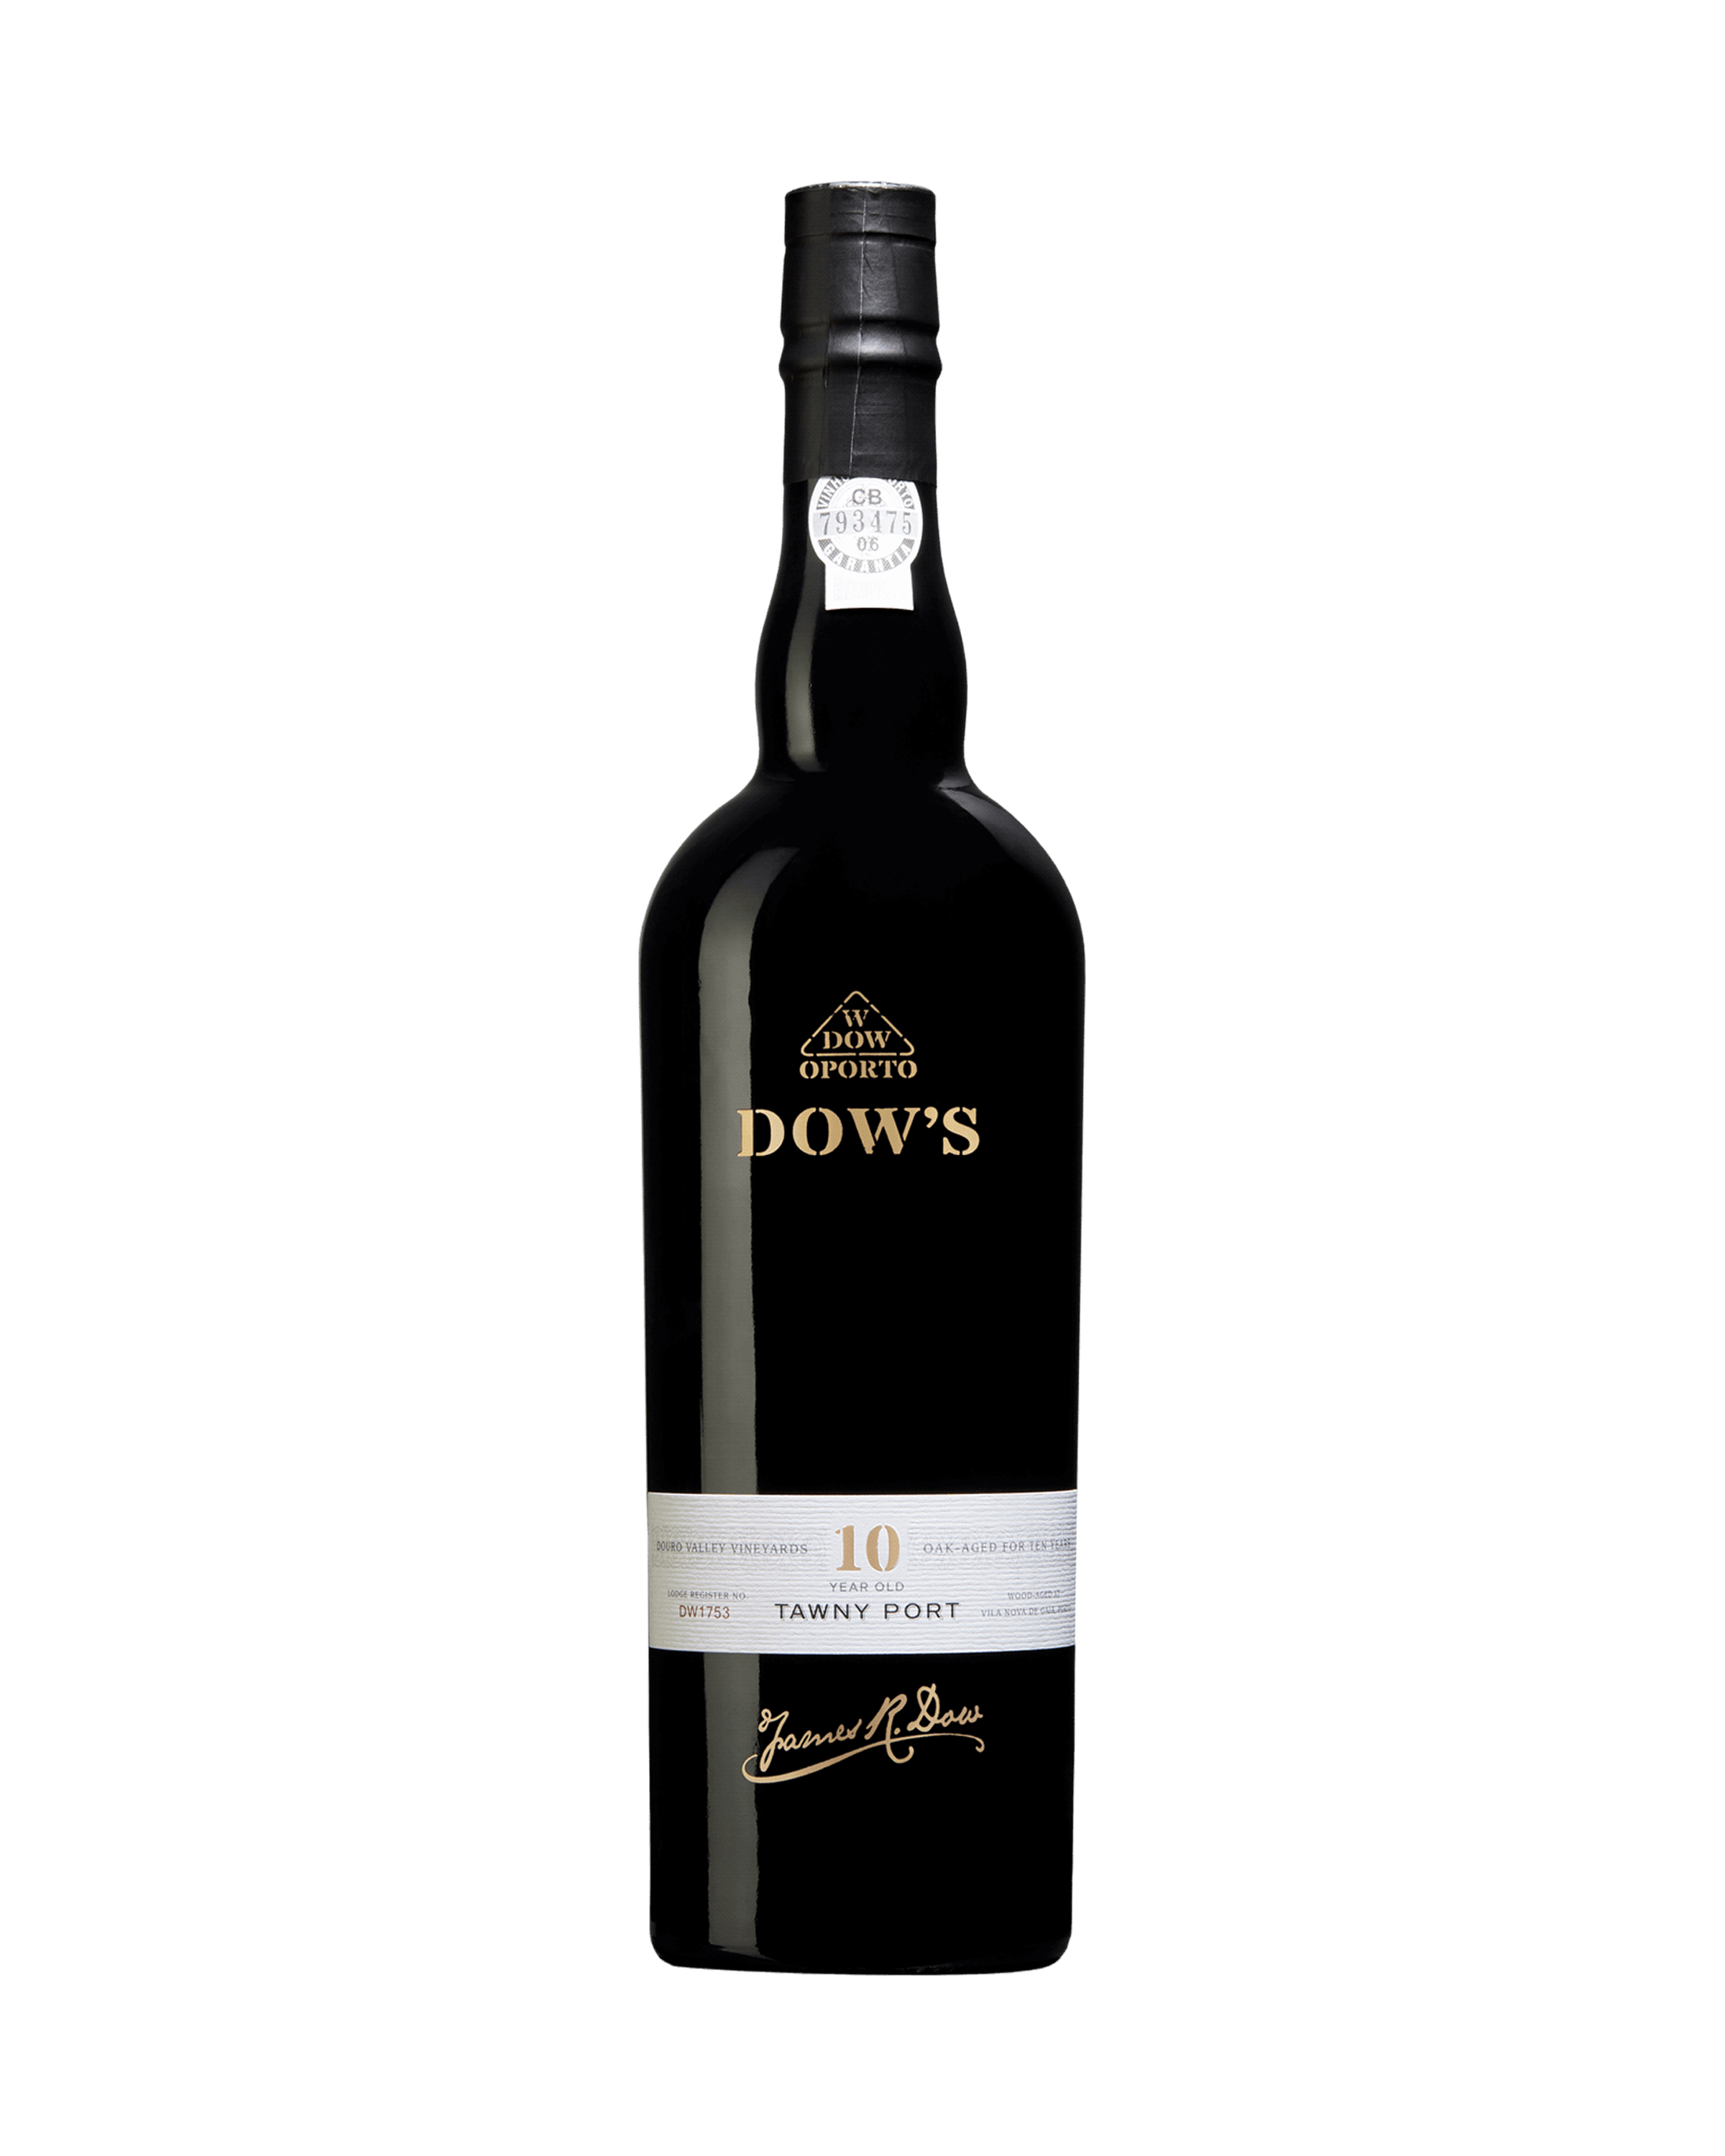 Dow's 10 year old Tawny Port